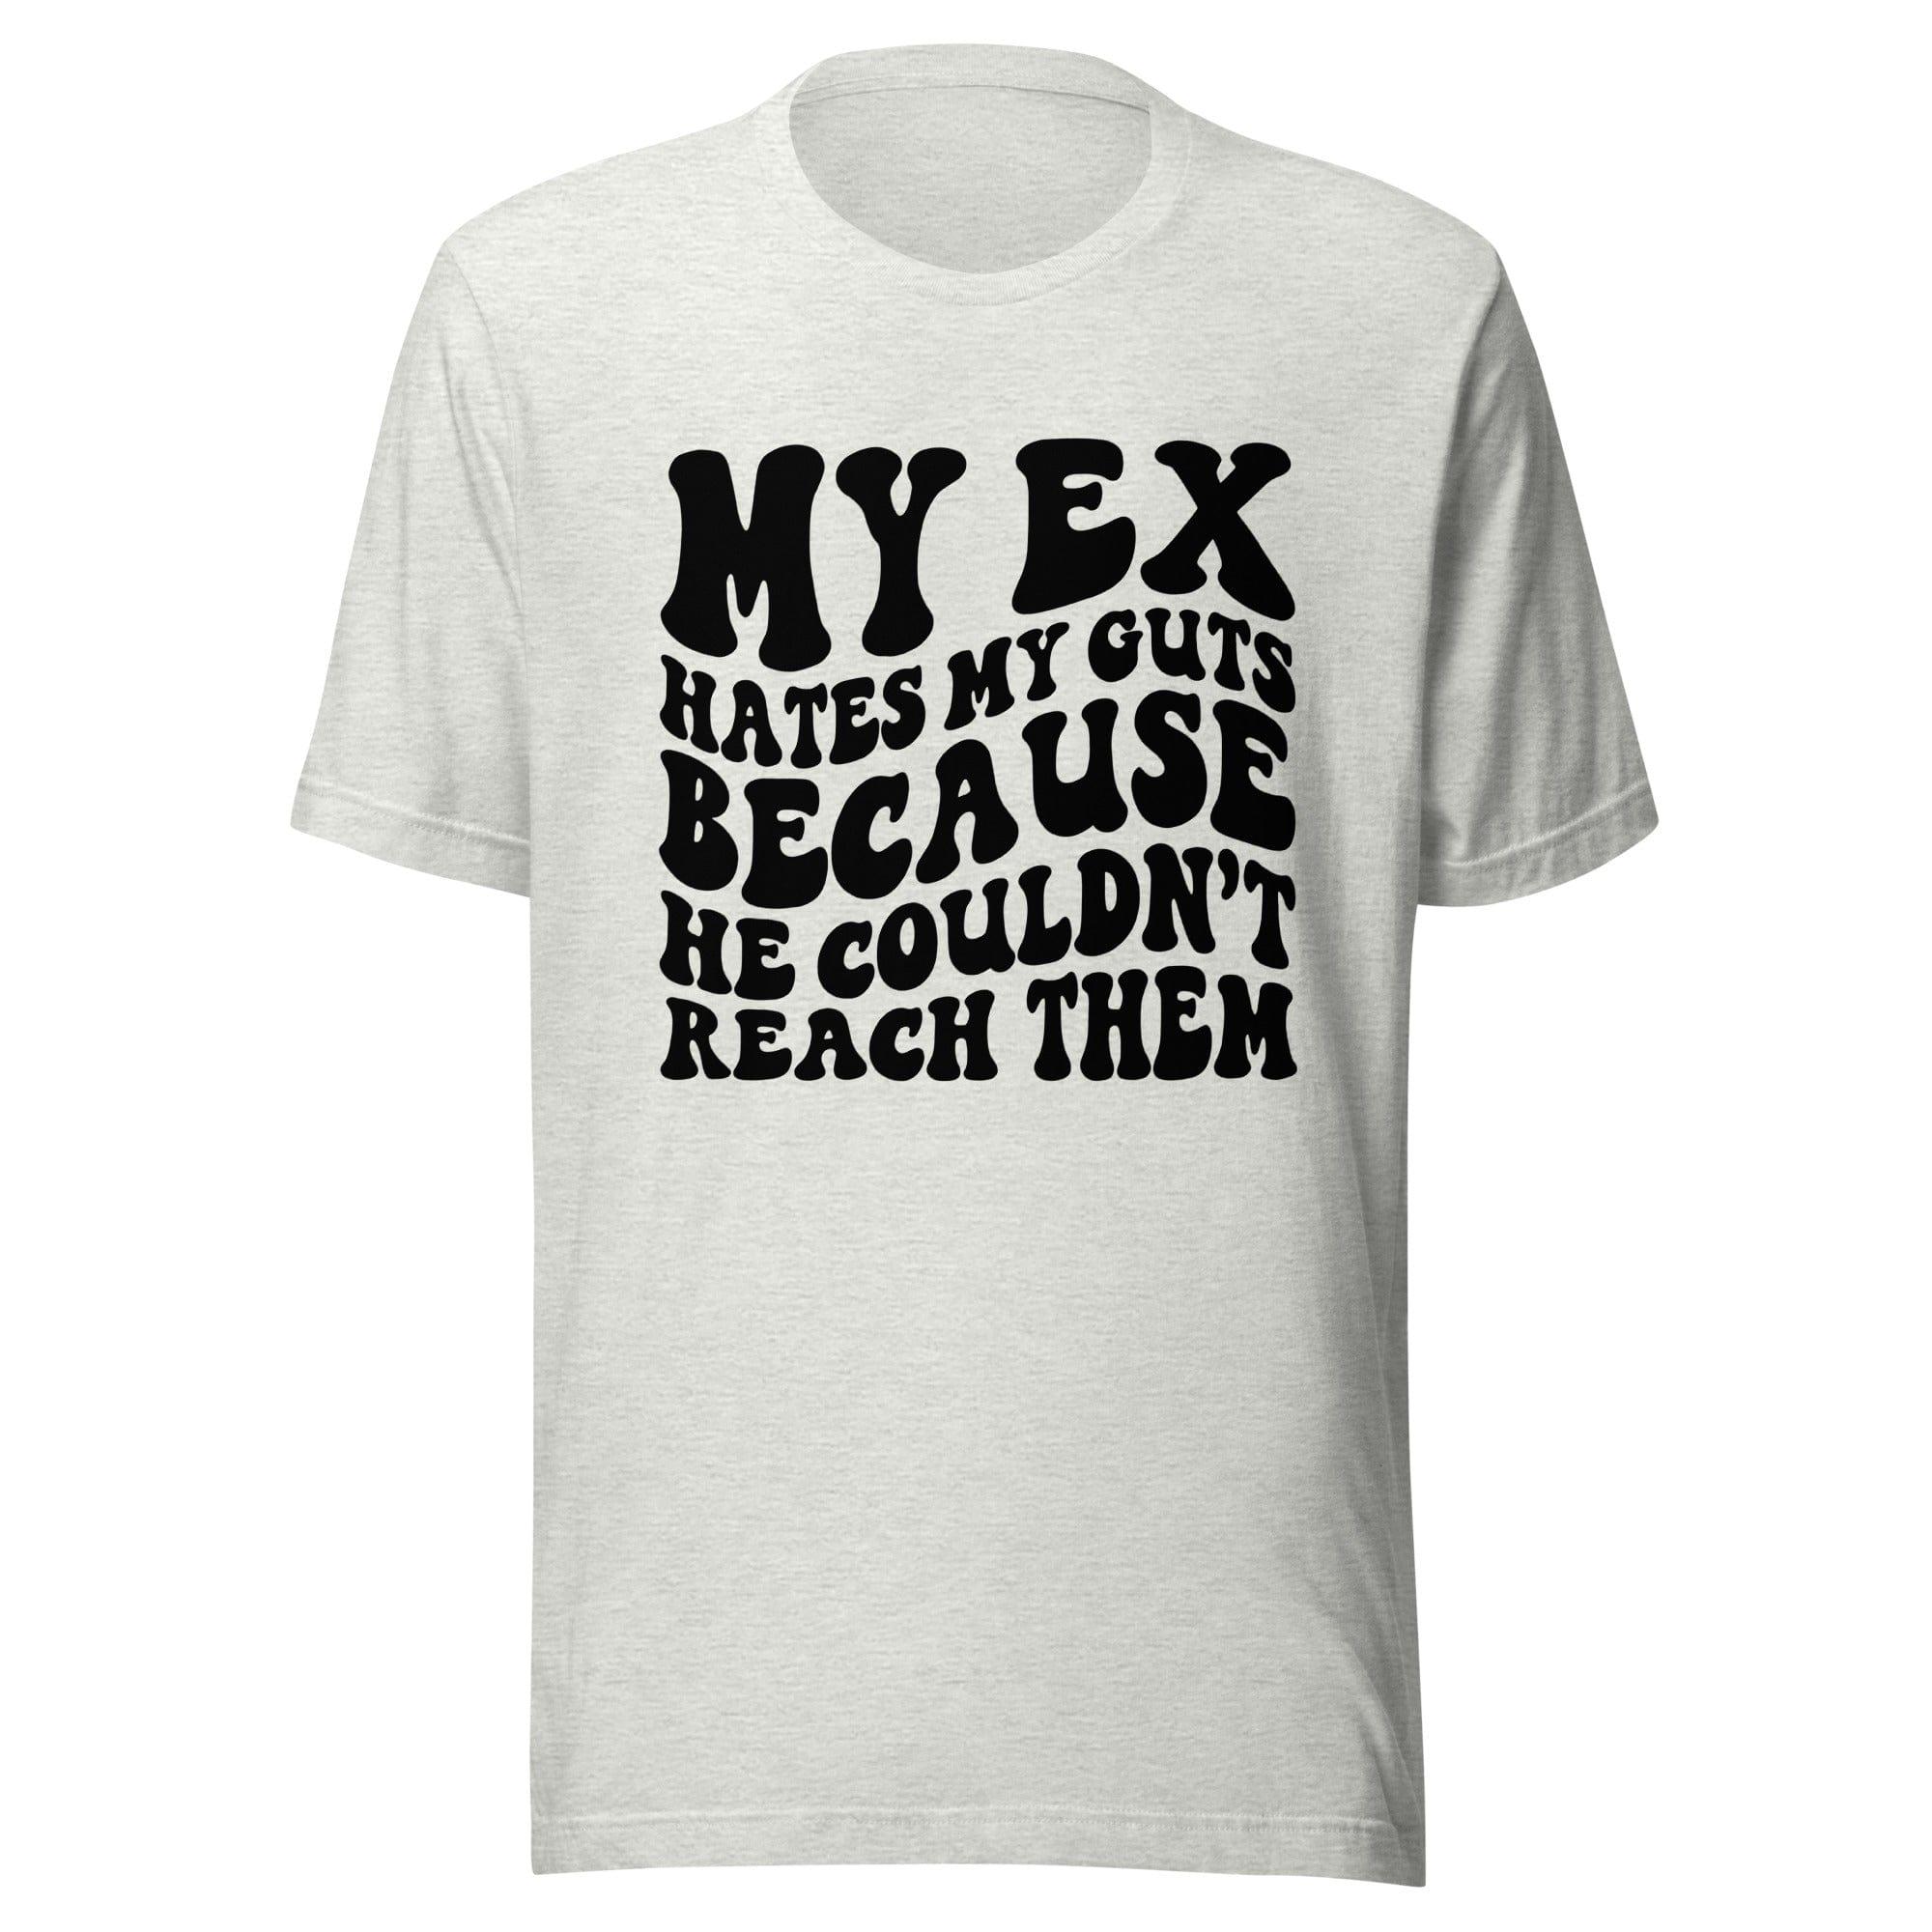 Humor T-Shirt My Ex Hates my Guts Because He couldn't Reach Them - TopKoalaTee